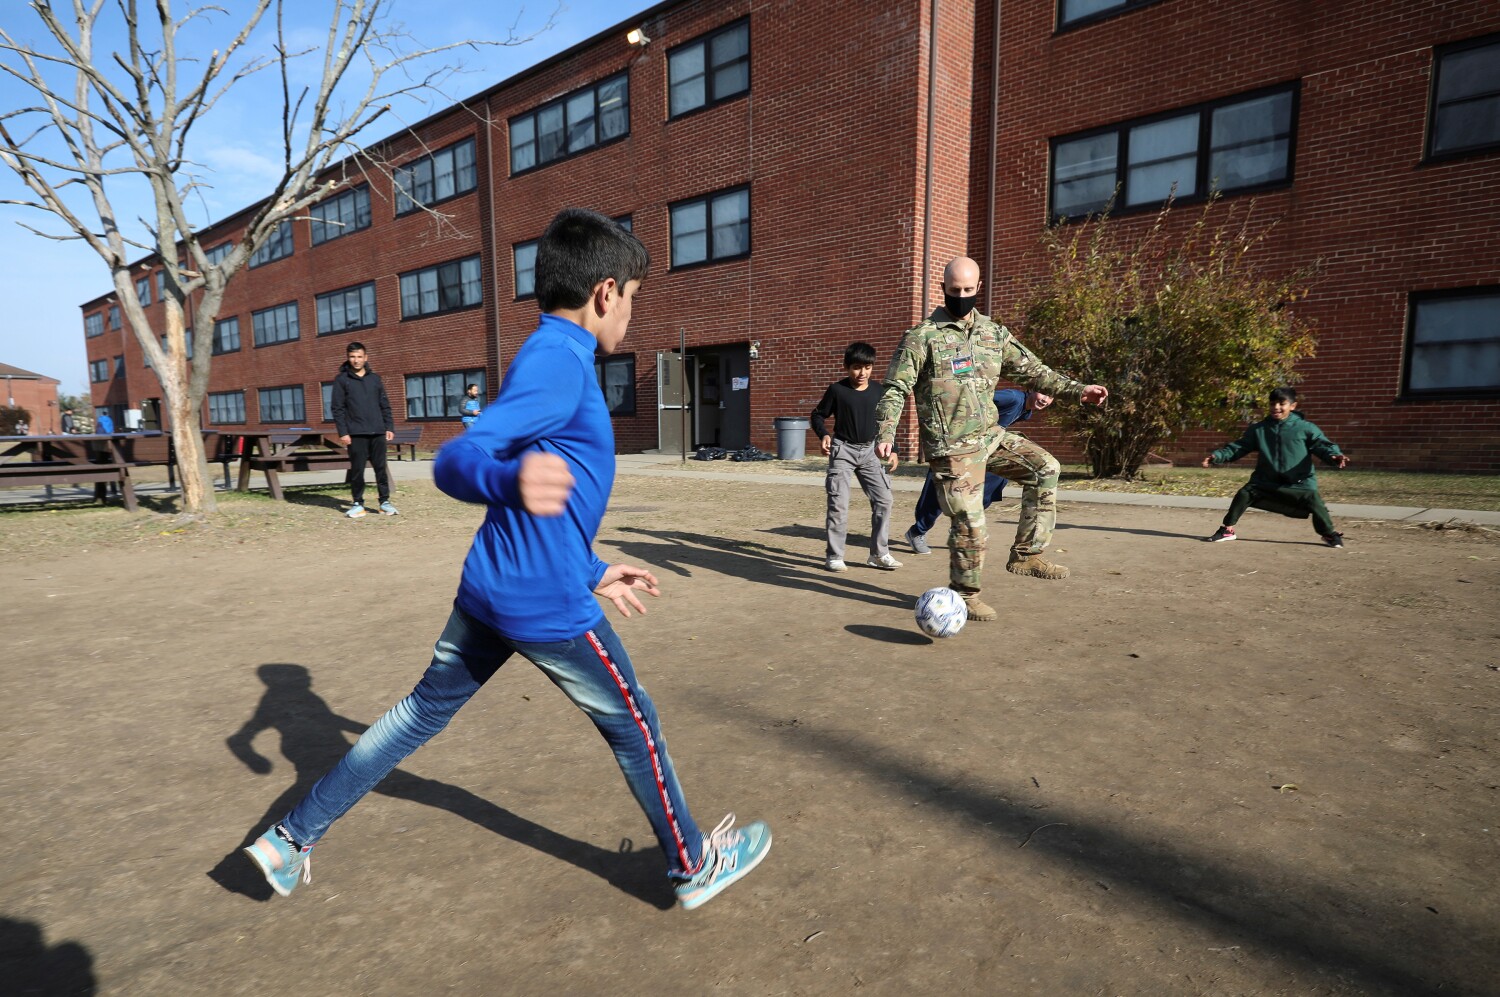 Legal counseling, Zumba, English classes: Afghans adjust to temporary life on U.S. military bases